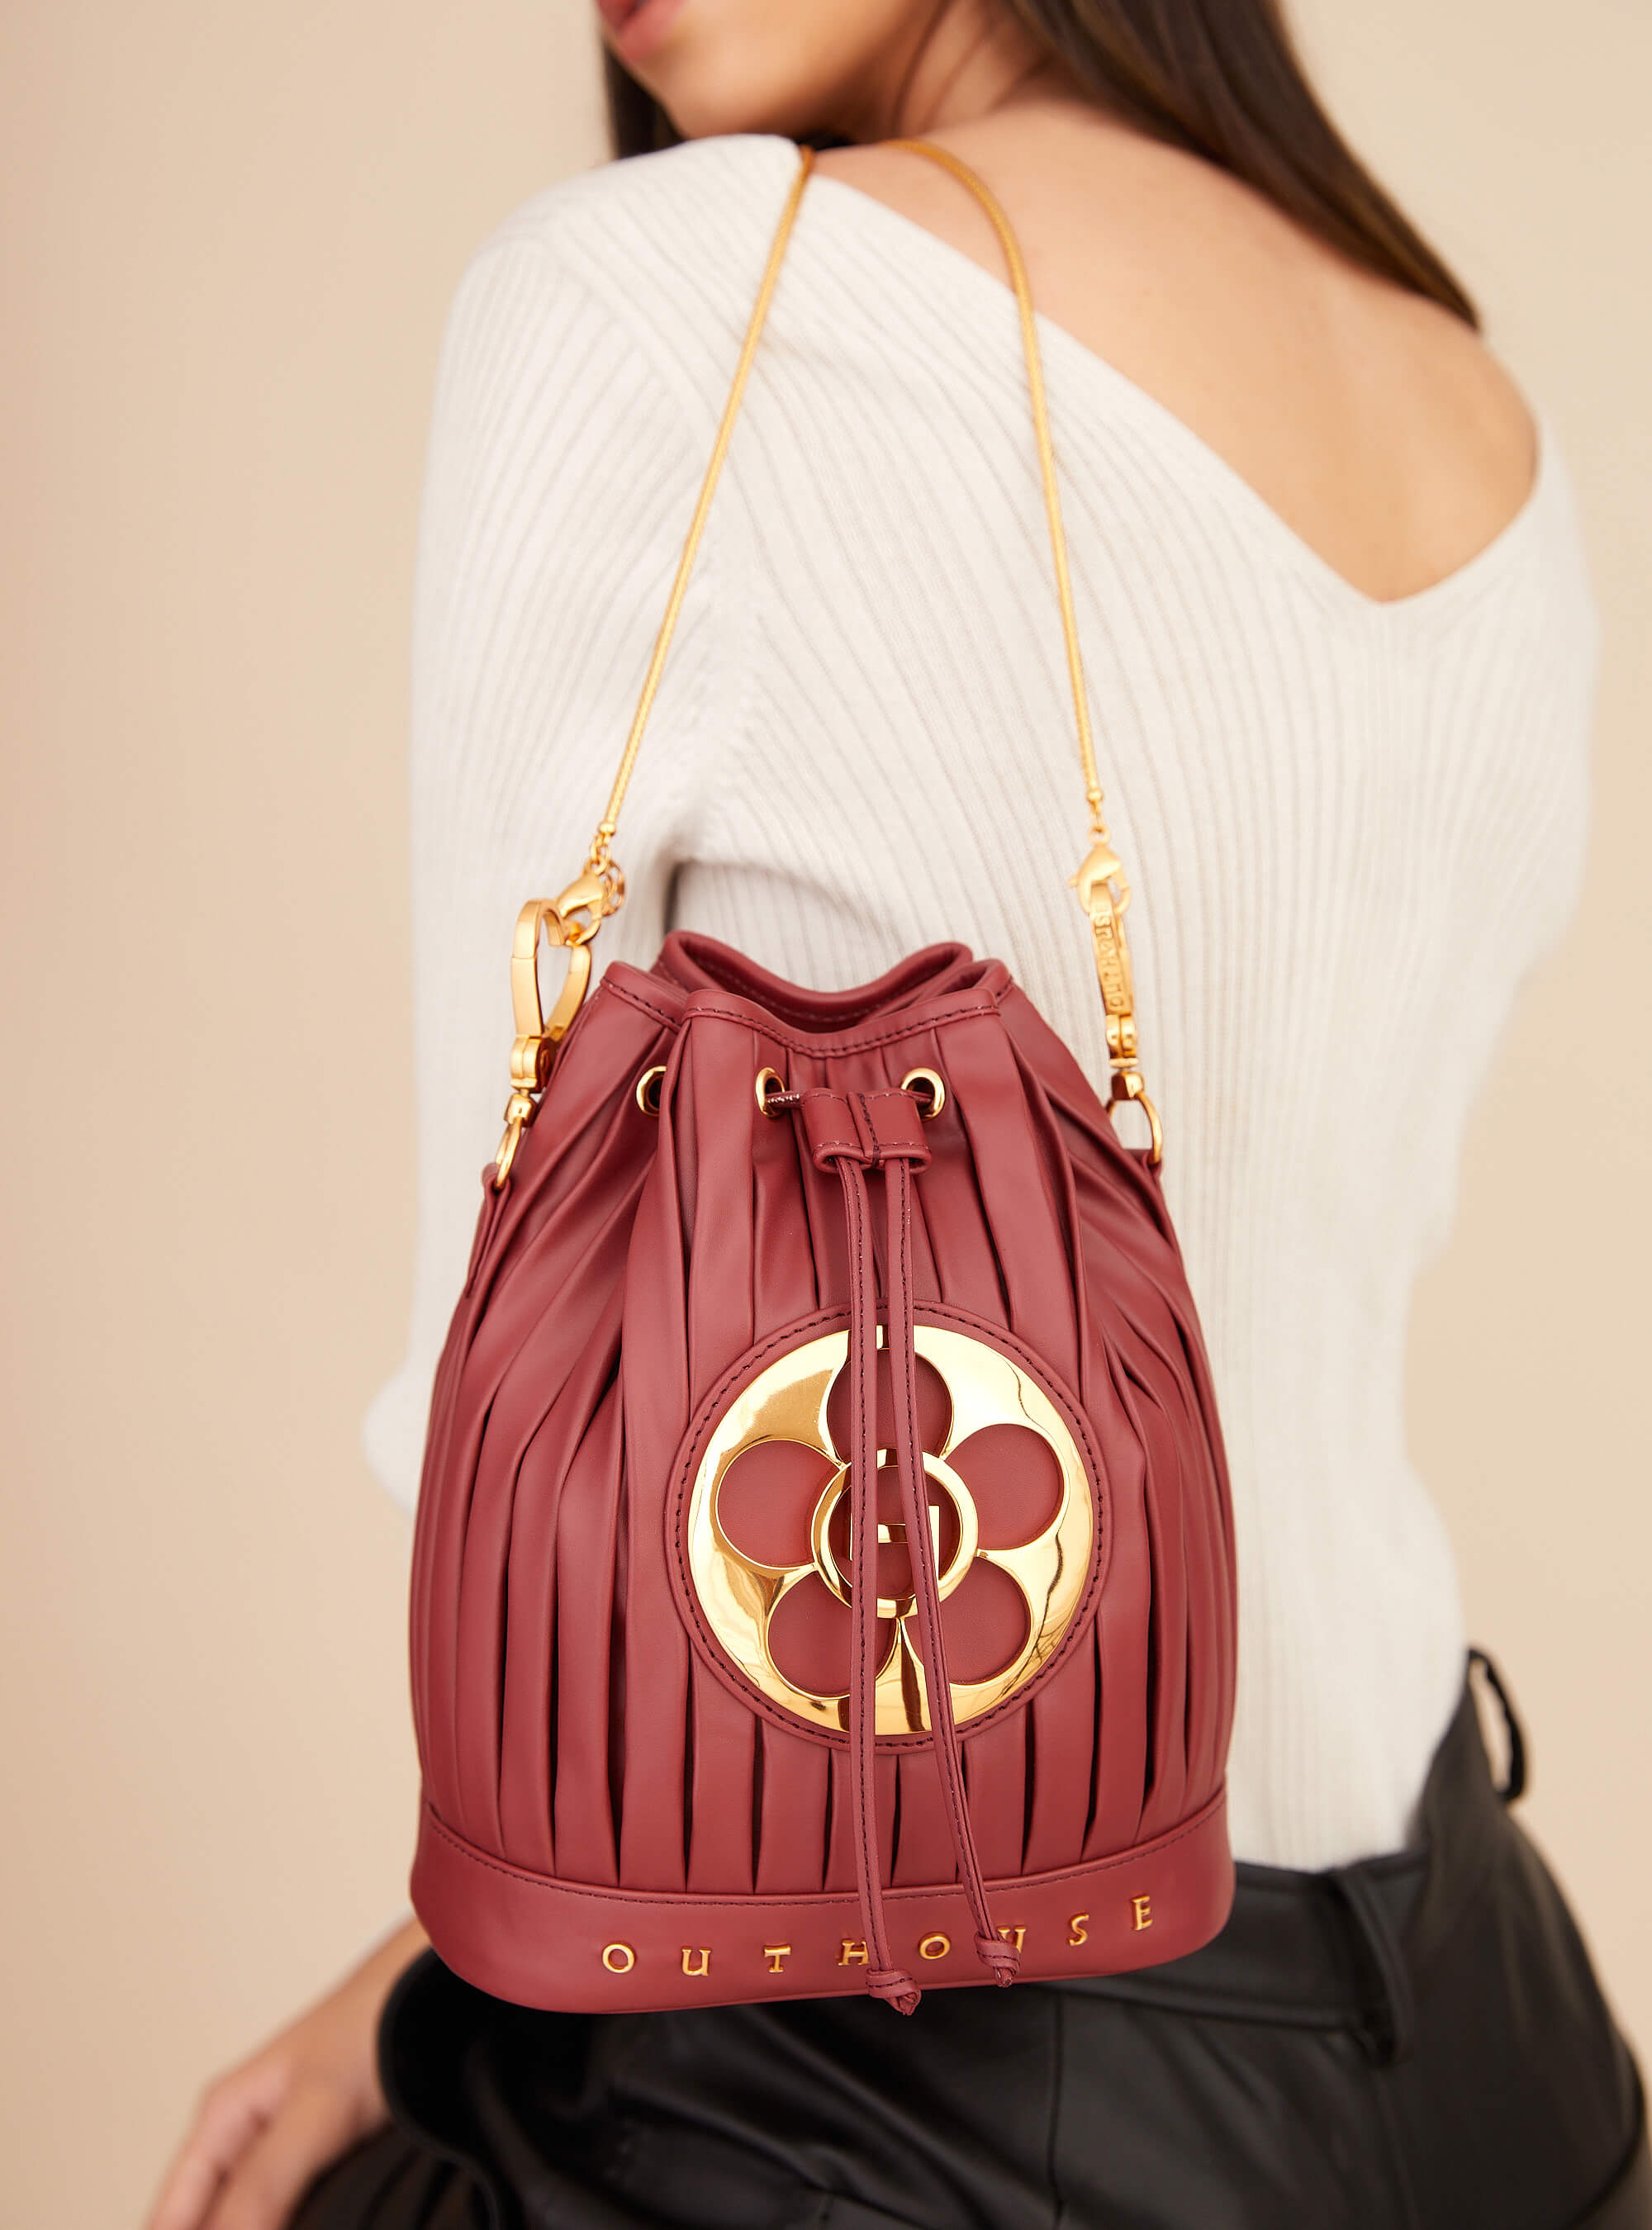 Outhouse: OH Poppi Bucket Bag in Noir Black Rosewood Maroon